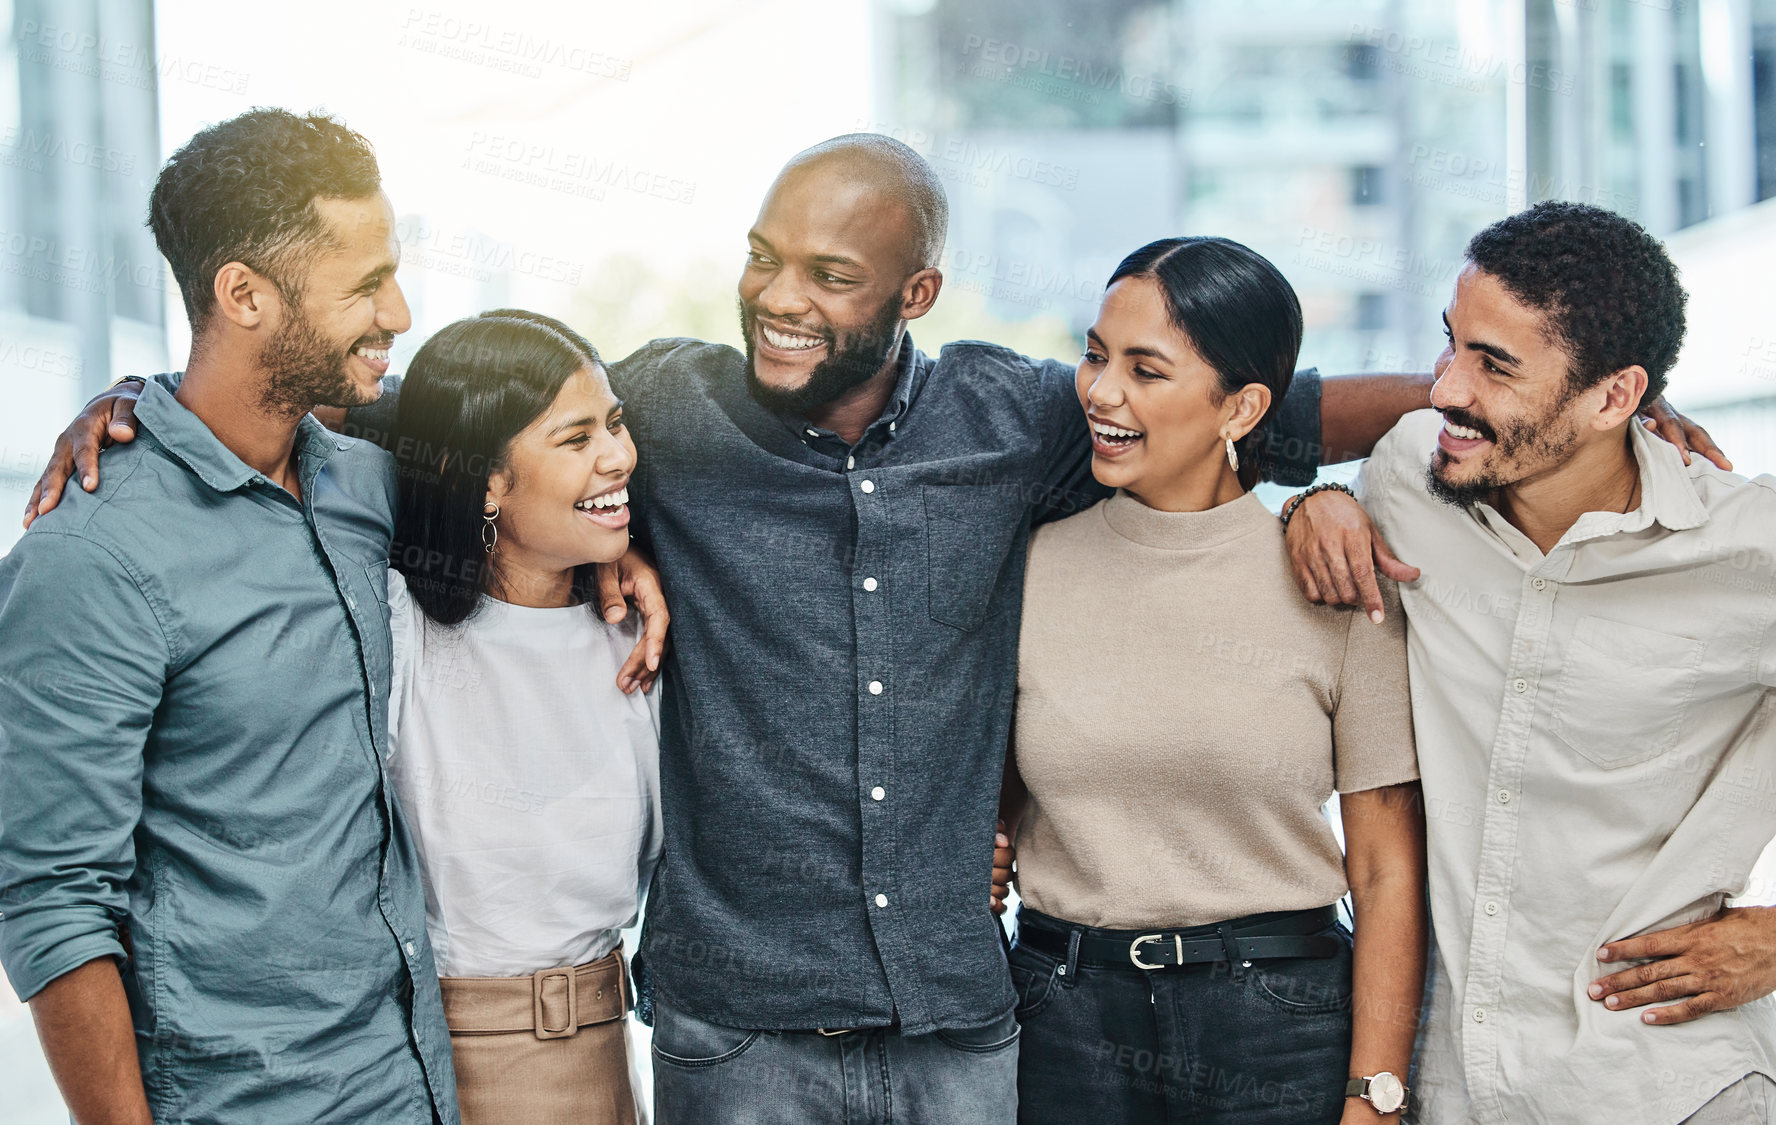 Buy stock photo Diversity, happy colleagues and in their office together at work with a lens flare. Teamwork or collaboration, funny or happiness and coworkers smiling or laughing at their modern workplace.